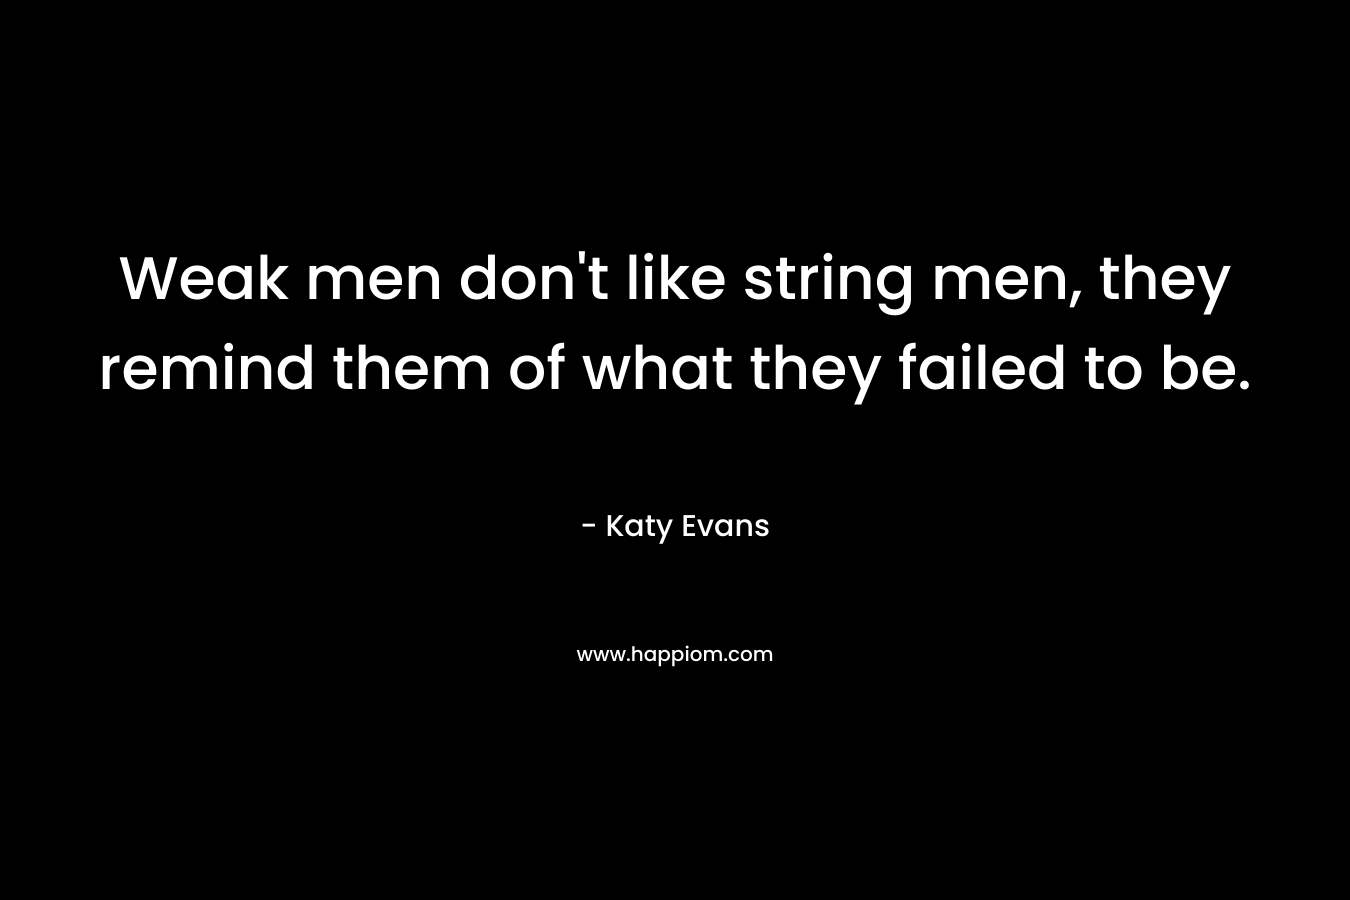 Weak men don’t like string men, they remind them of what they failed to be. – Katy Evans